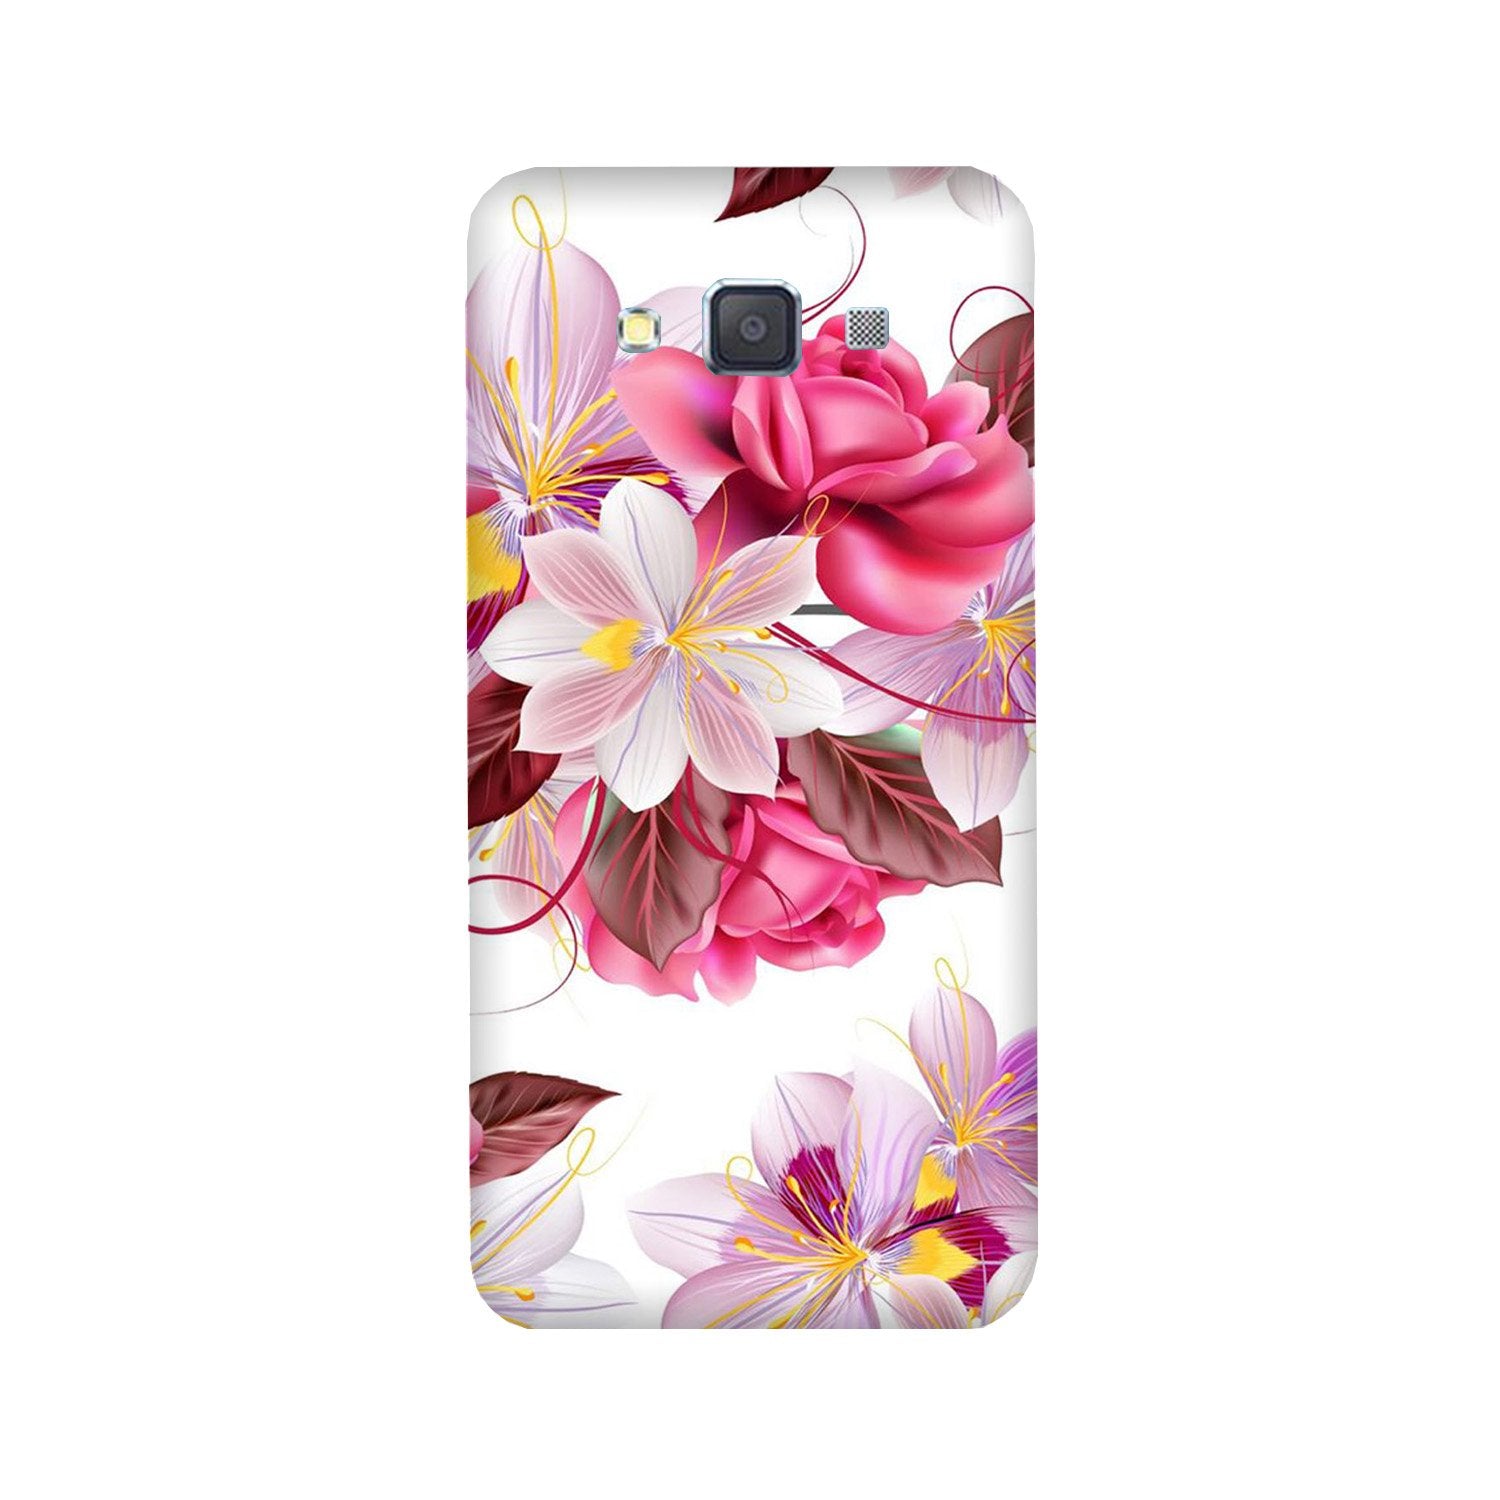 Beautiful flowers Case for Galaxy Grand Prime